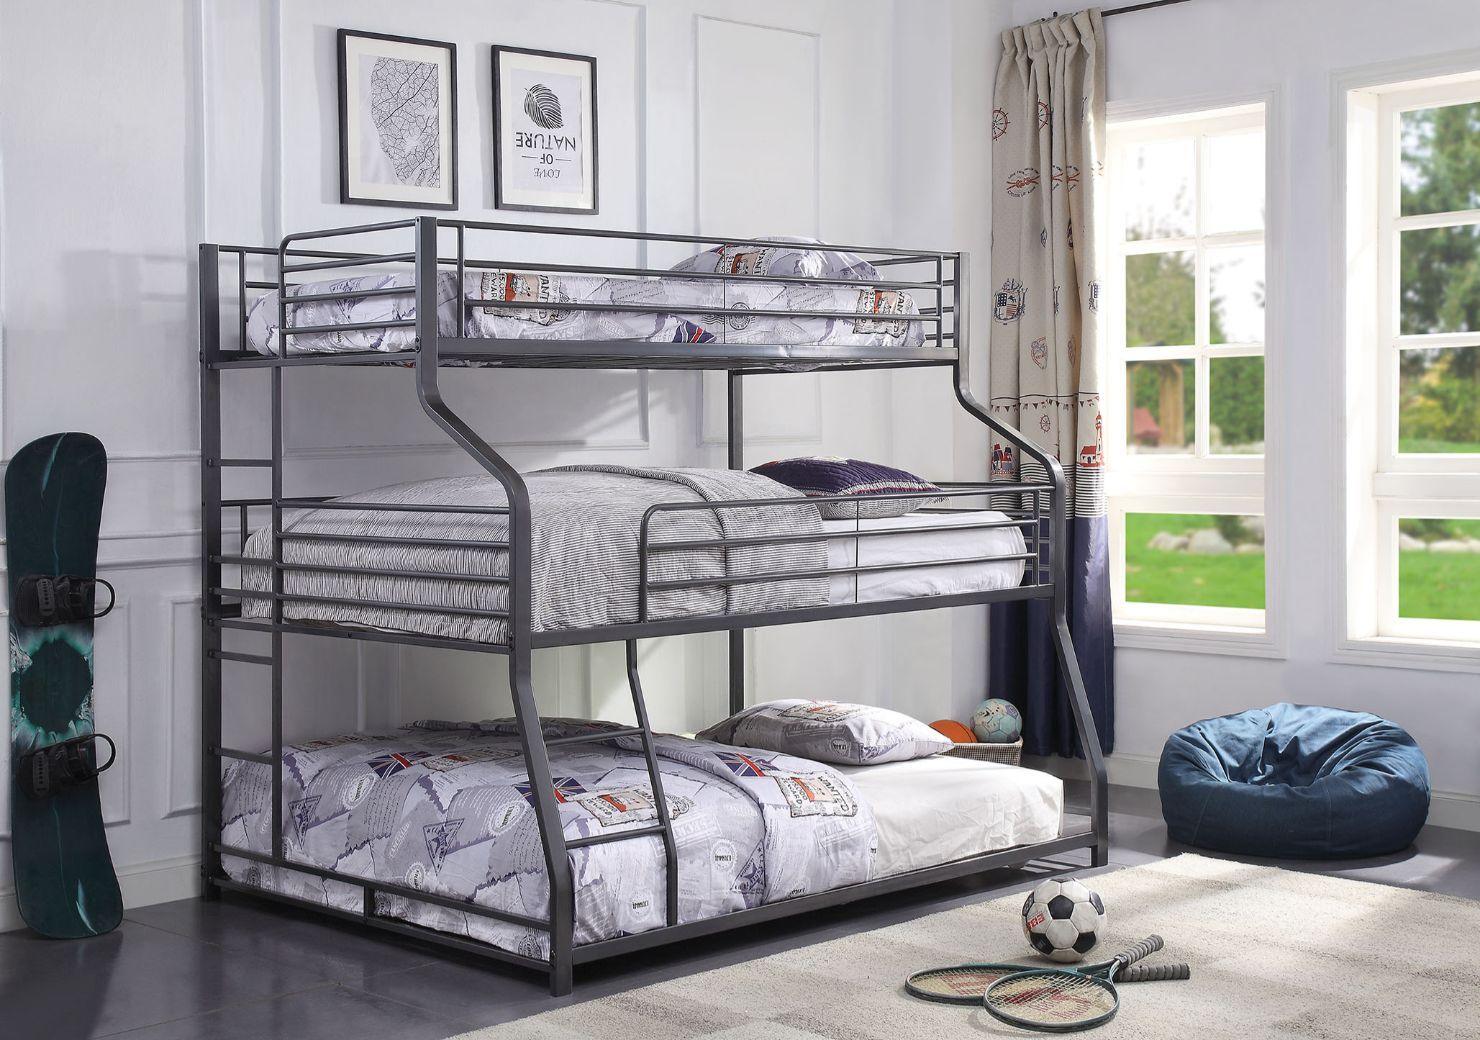 ACME - Caius II - Triple Bunk Bed - Twin Over Full Over Queen - Gunmetal - 5th Avenue Furniture